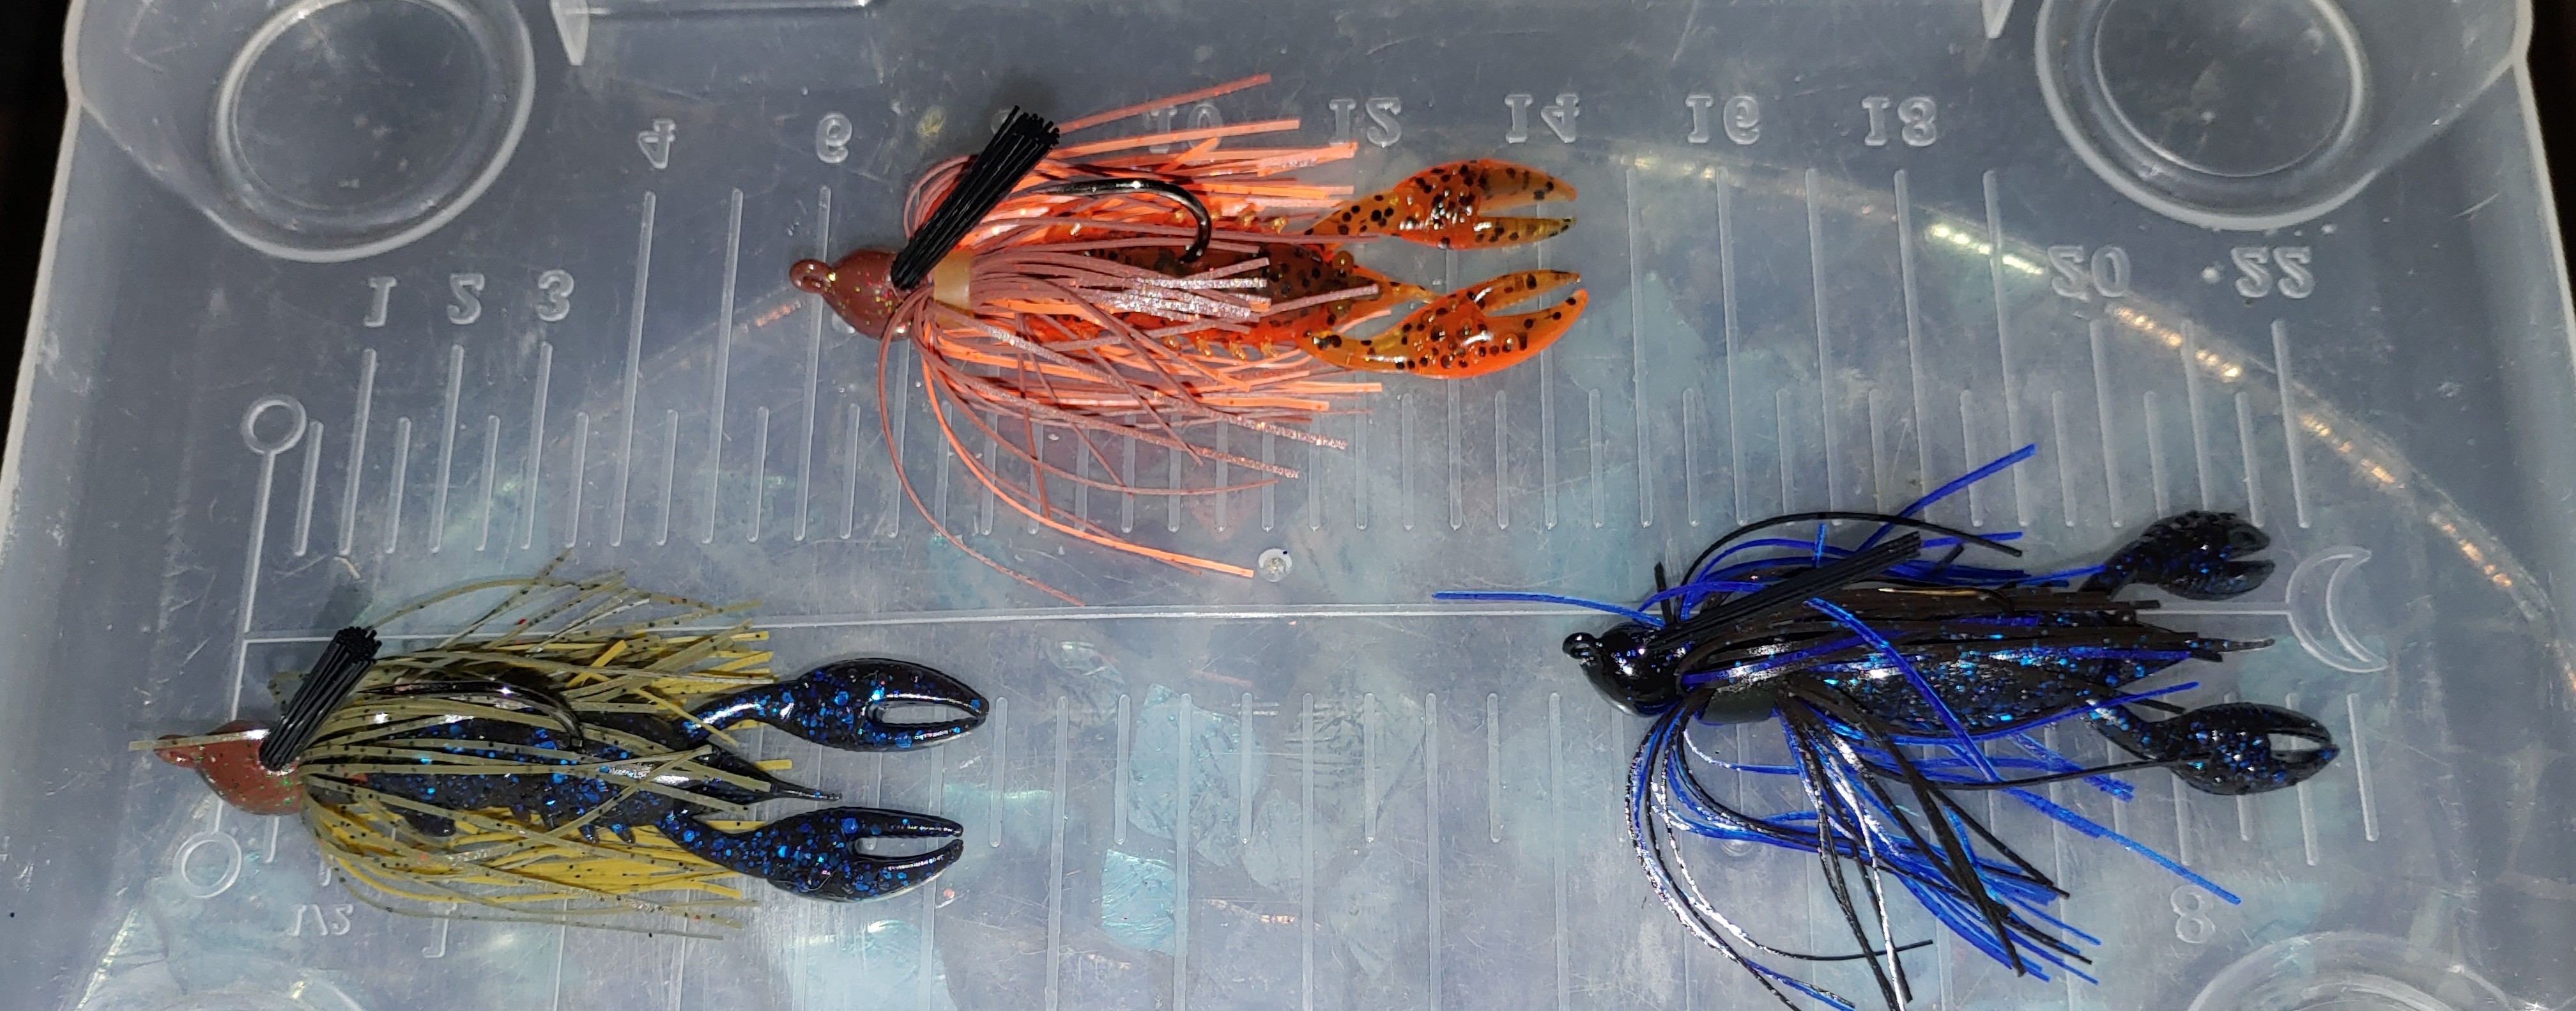 Jig Trailers 101: How To Pair Your Bass Jigs With The Right Trailers! 